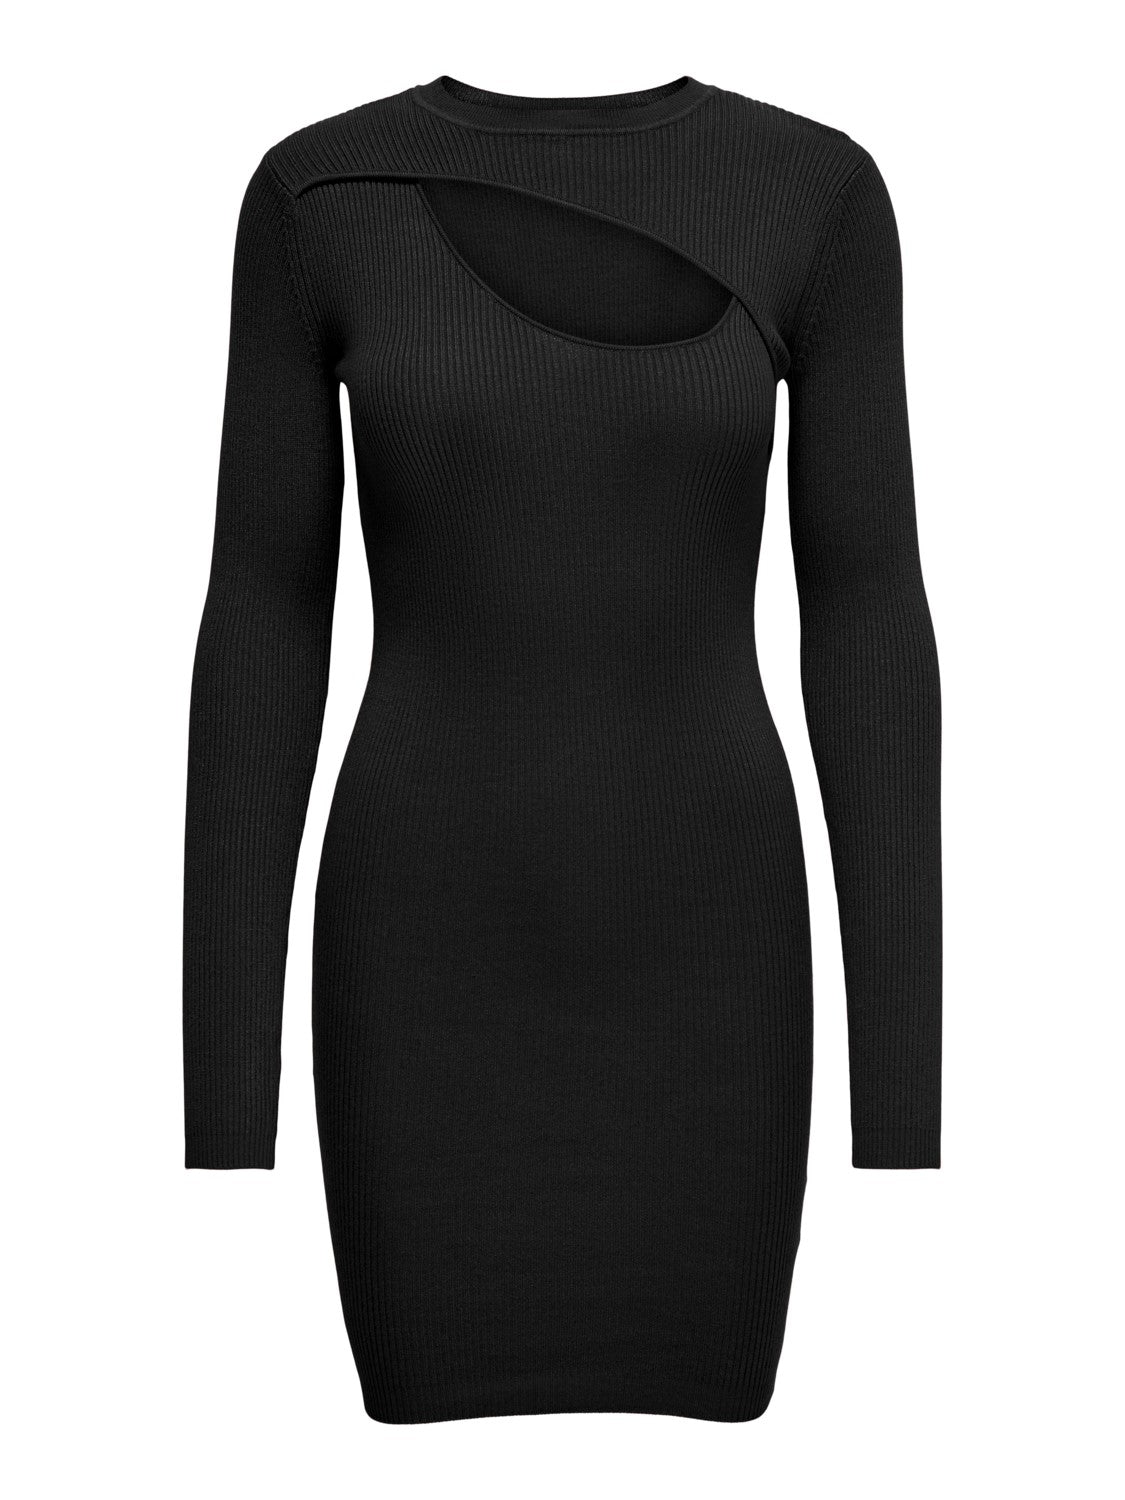 ONLY Women's Fitted Black Dress